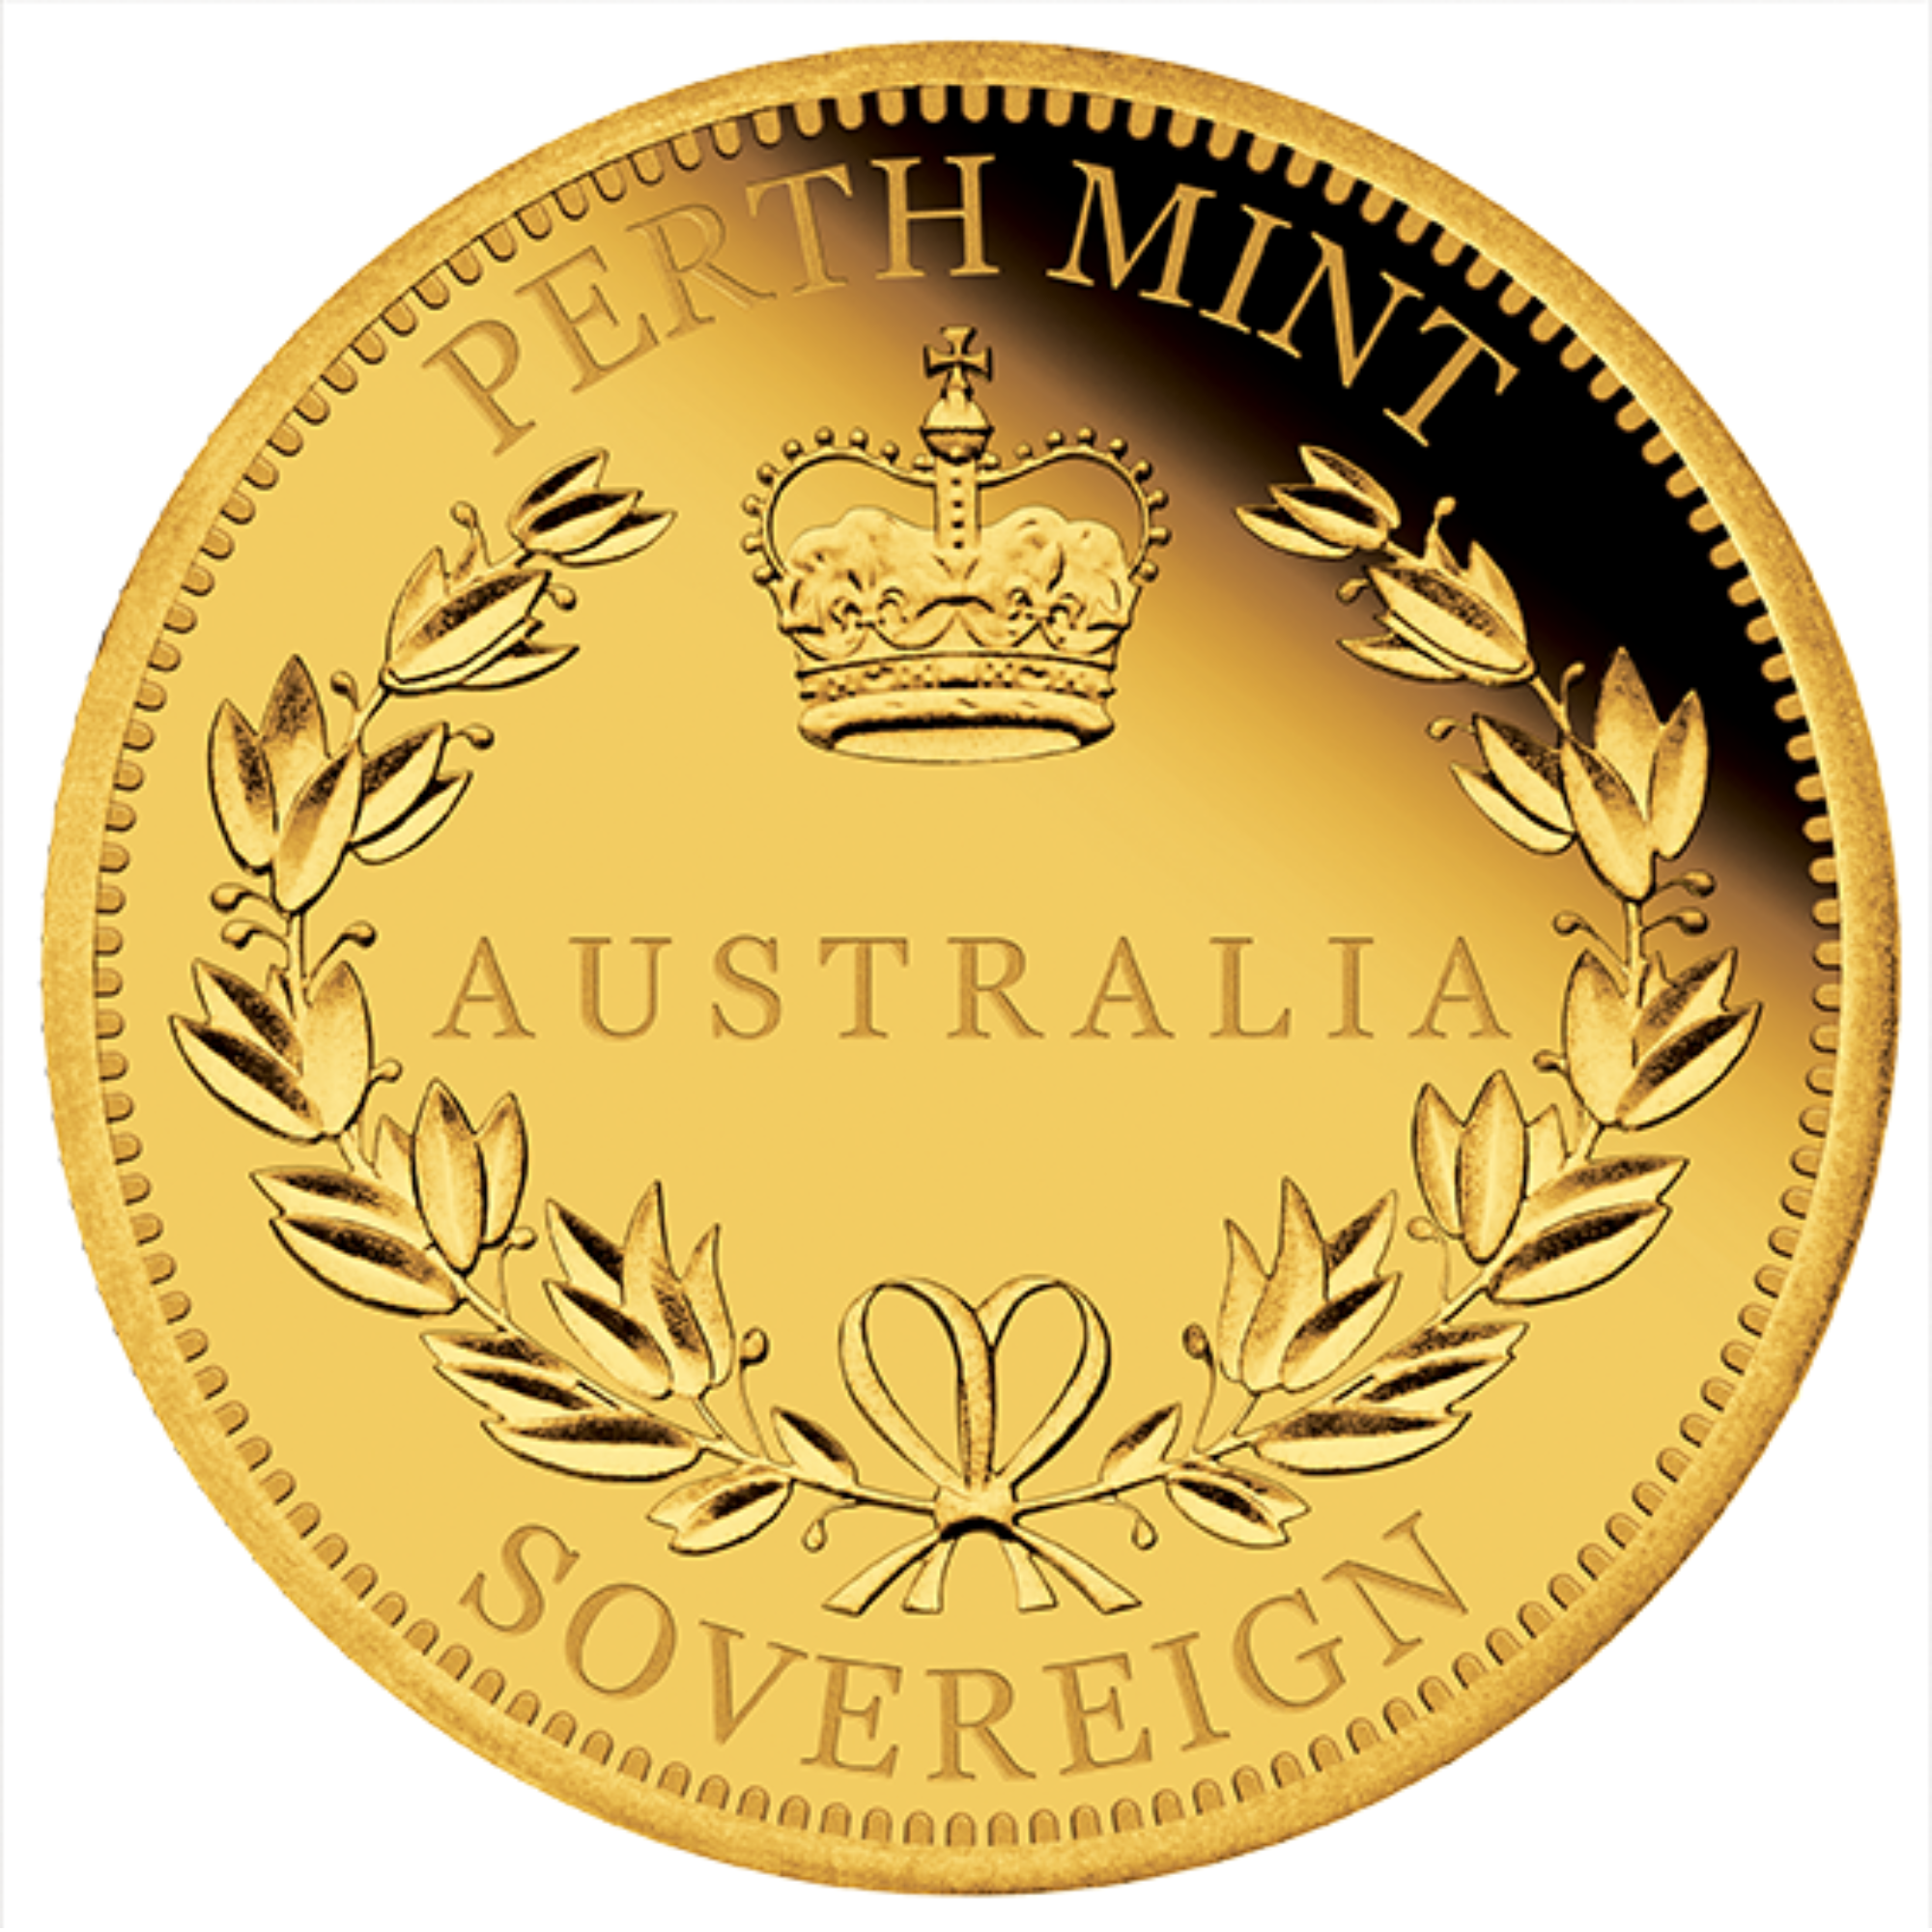 2016 Perth Mint Australian Gold Sovereign Proof Coin